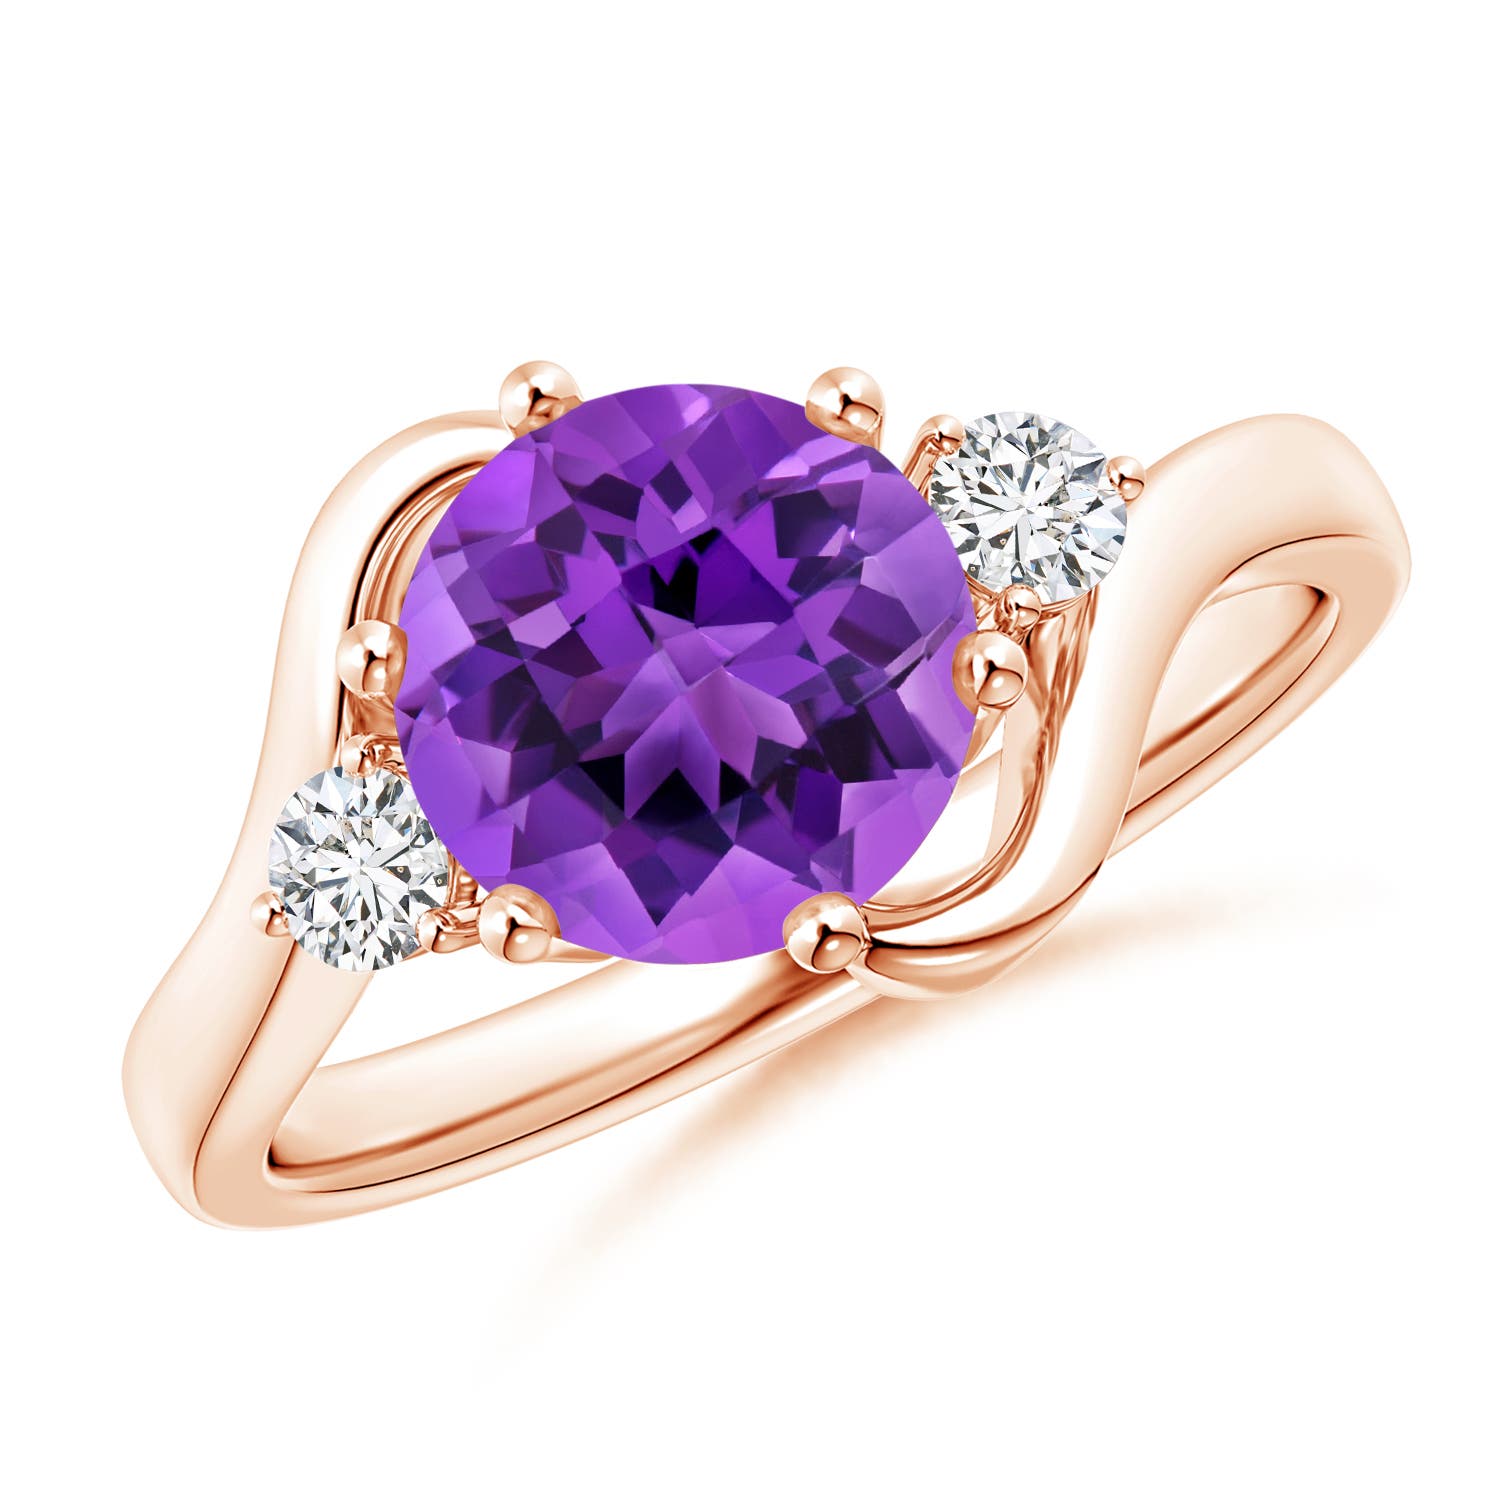 AAA - Amethyst / 1.84 CT / 14 KT Rose Gold